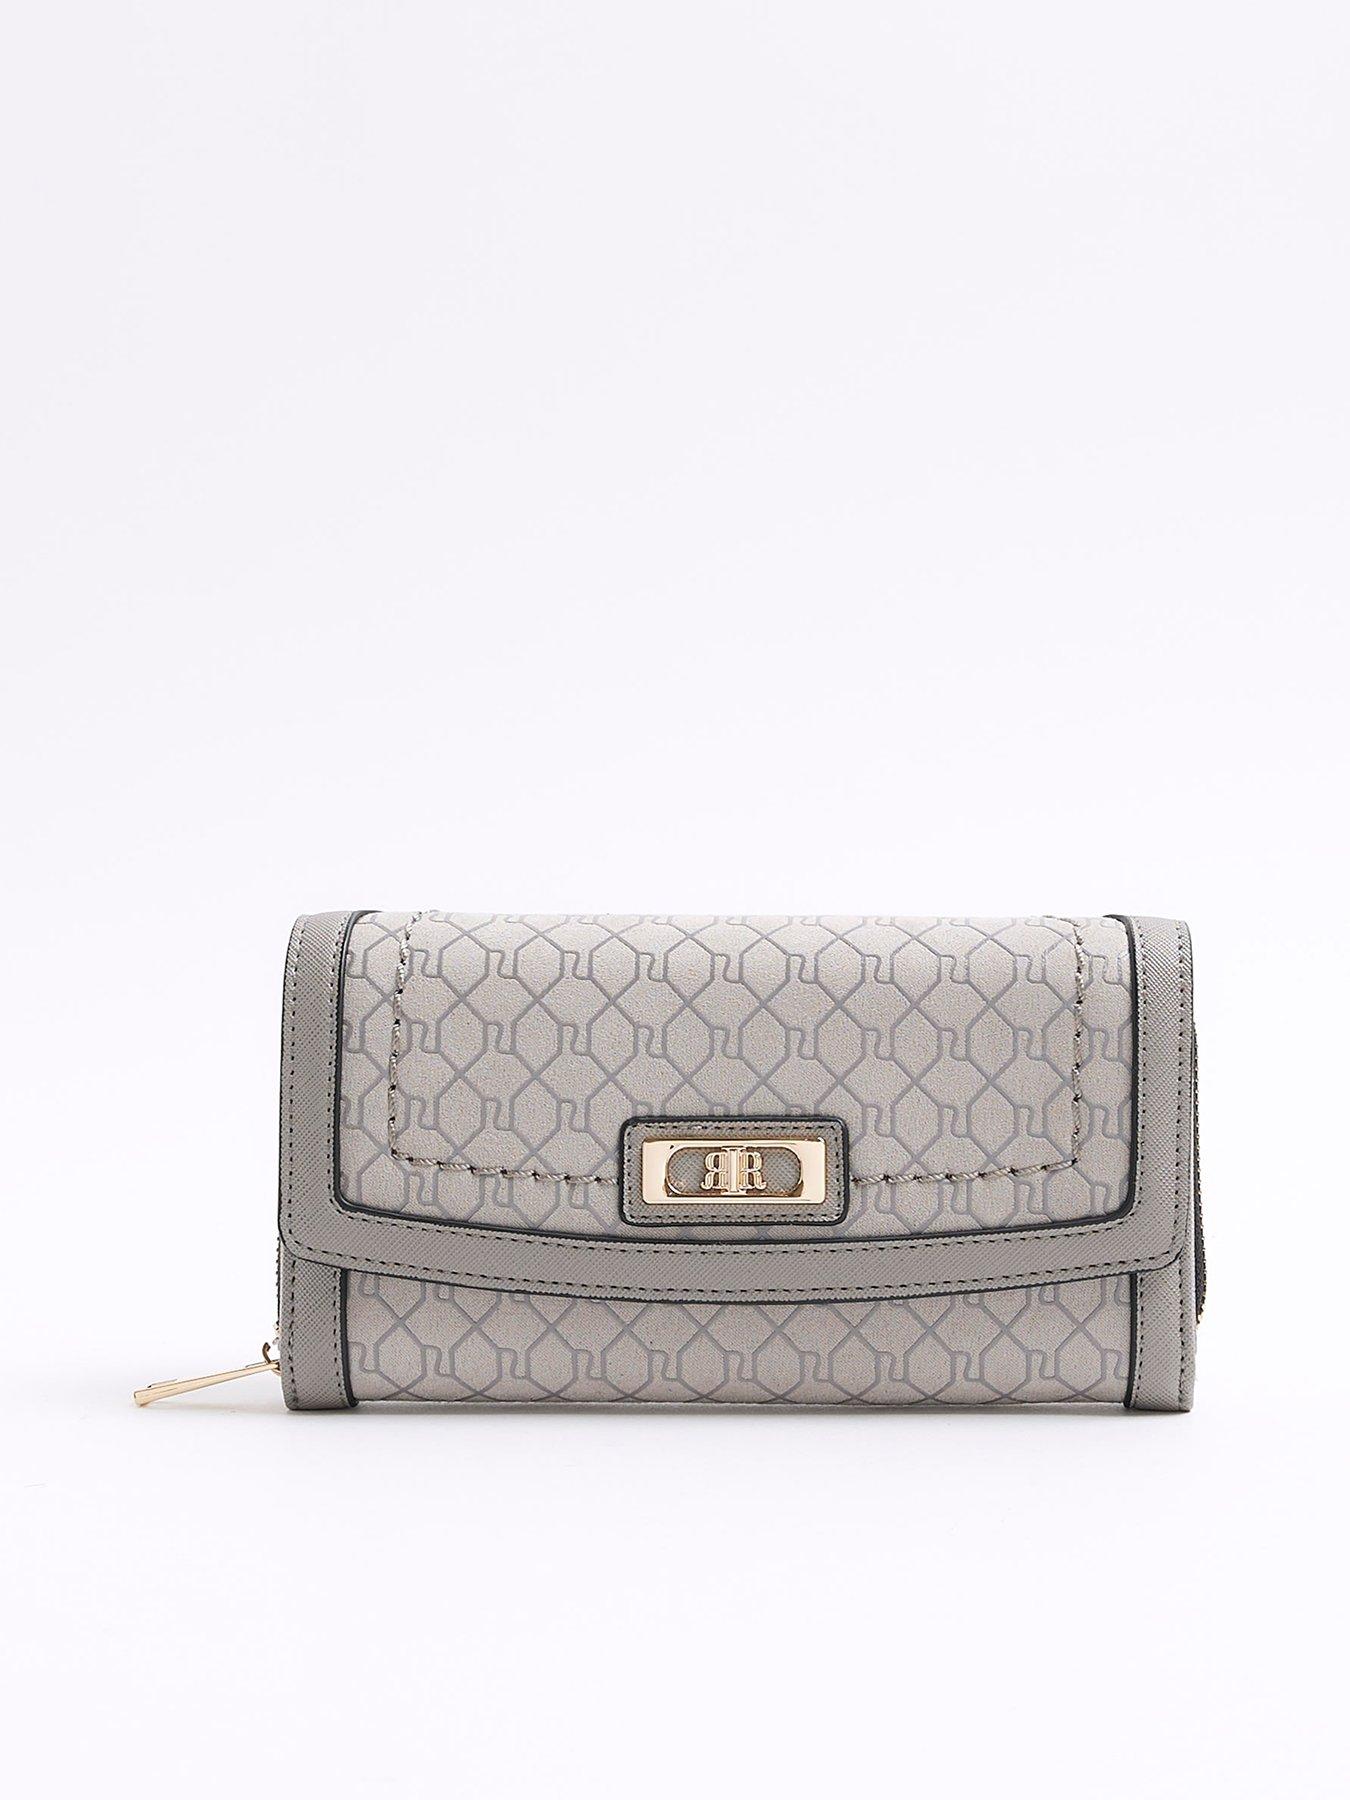 Stylish Grey and Gold Crossbody Bag by A New Day